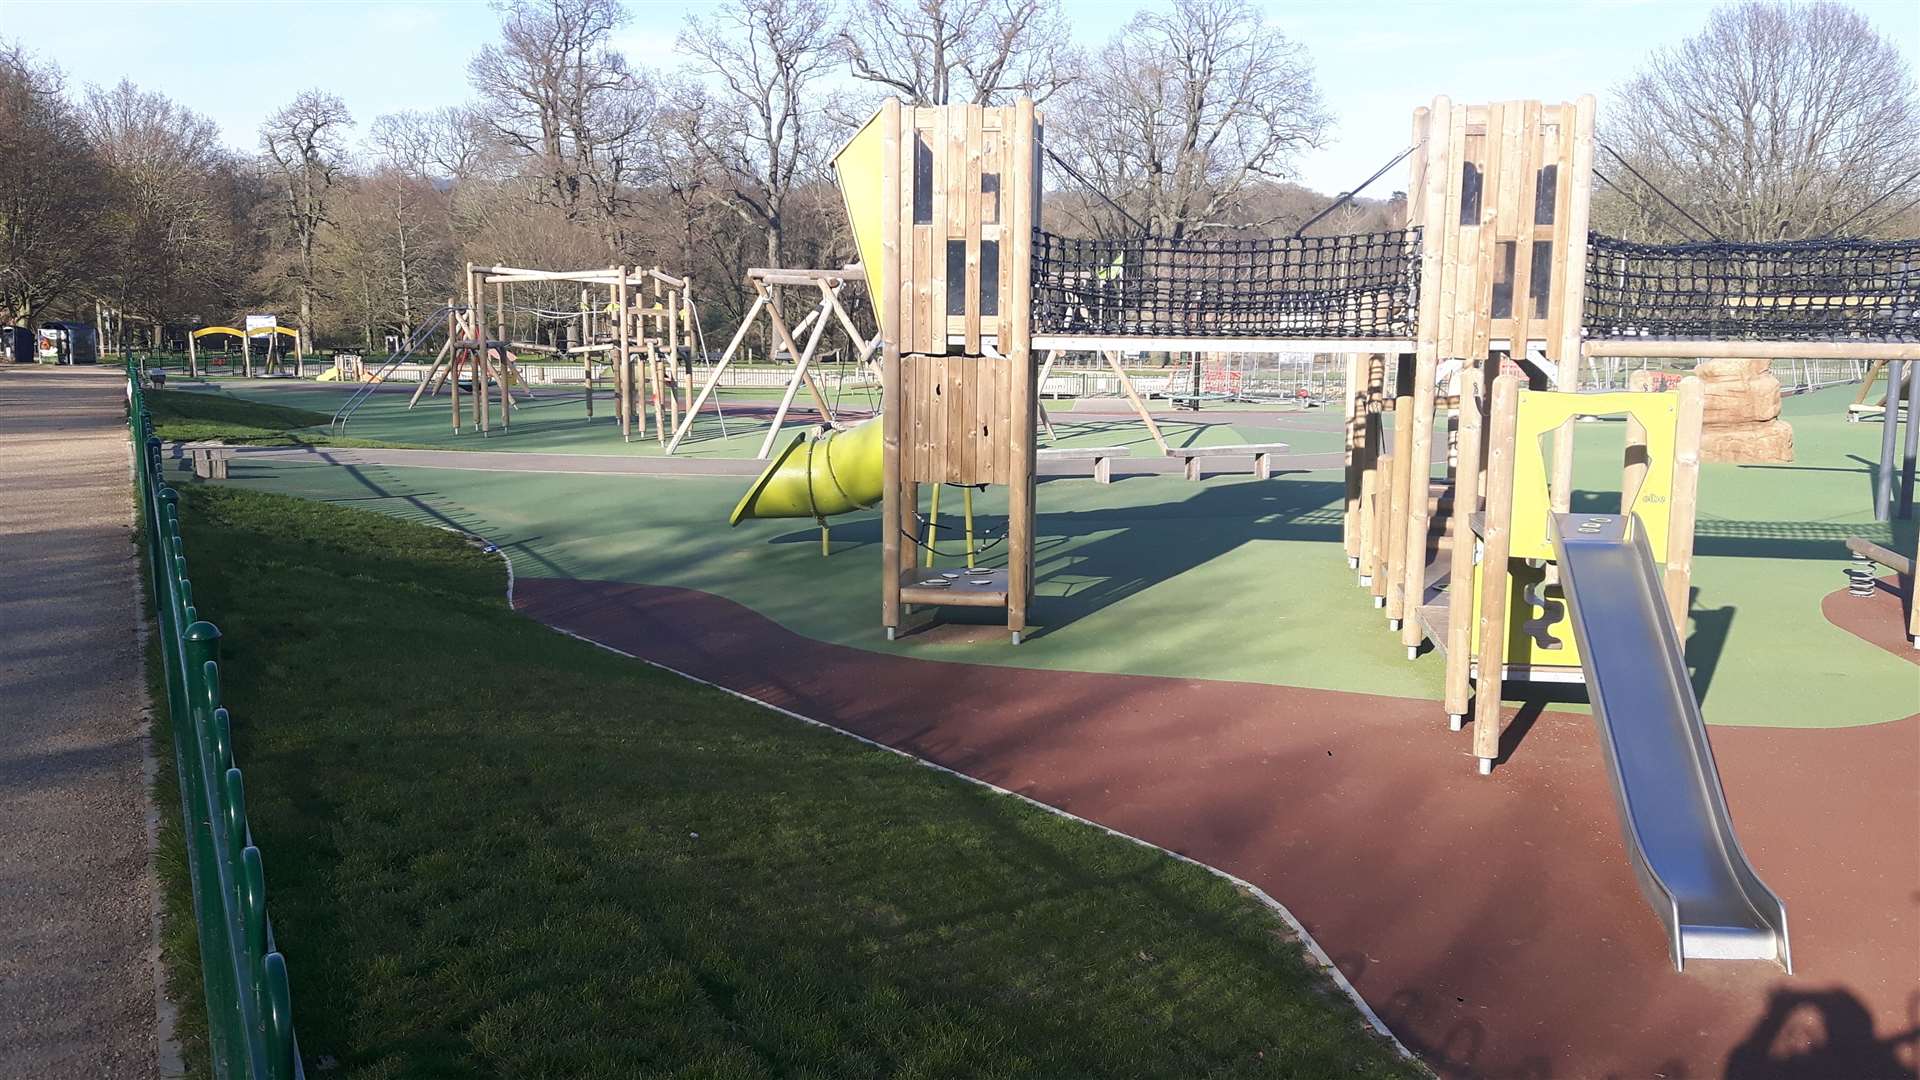 Money will be spent improving the town's parks, like Mote Park